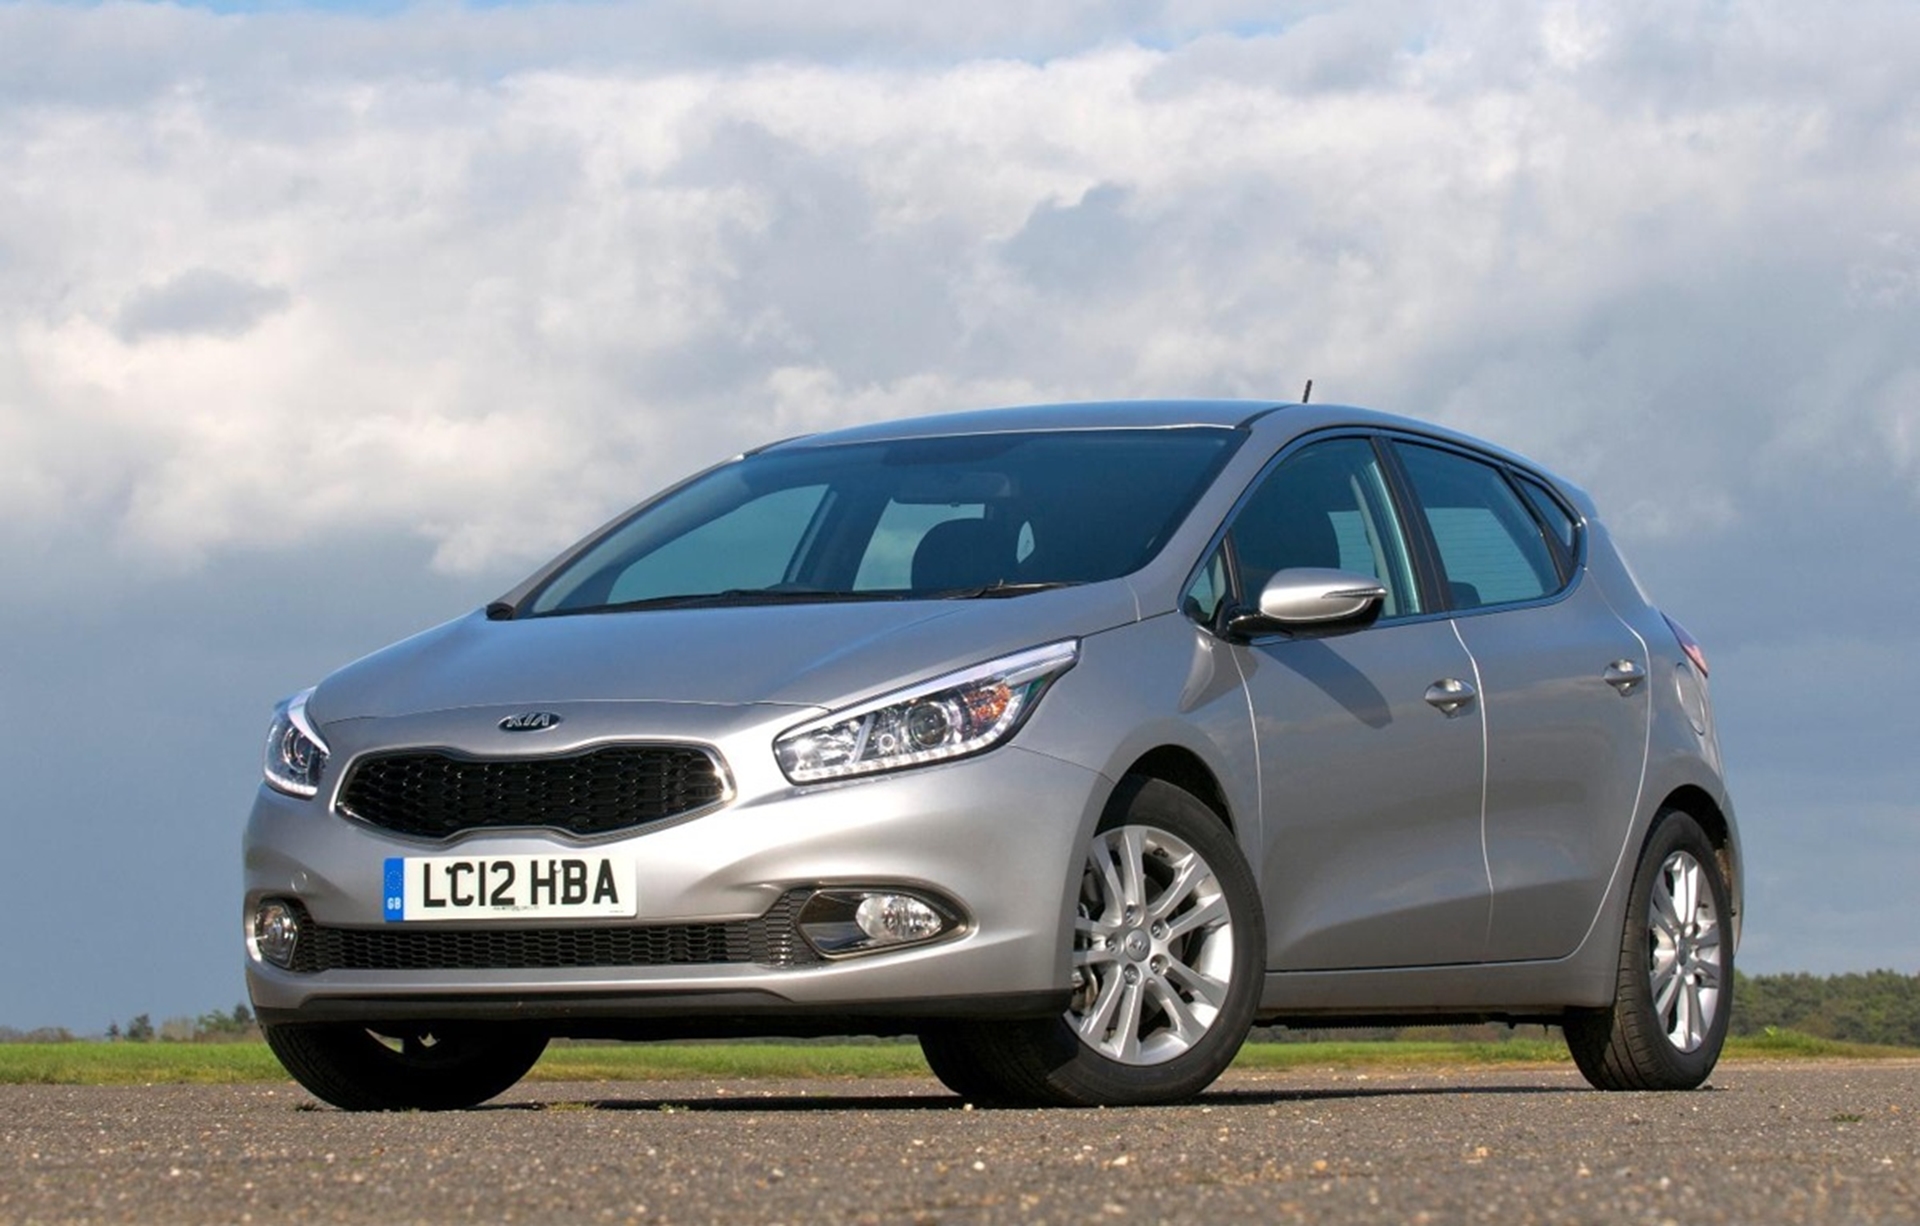 UK SHOW DEBUT FOR ALL-NEW KIA CEED AT MOTOREXPO